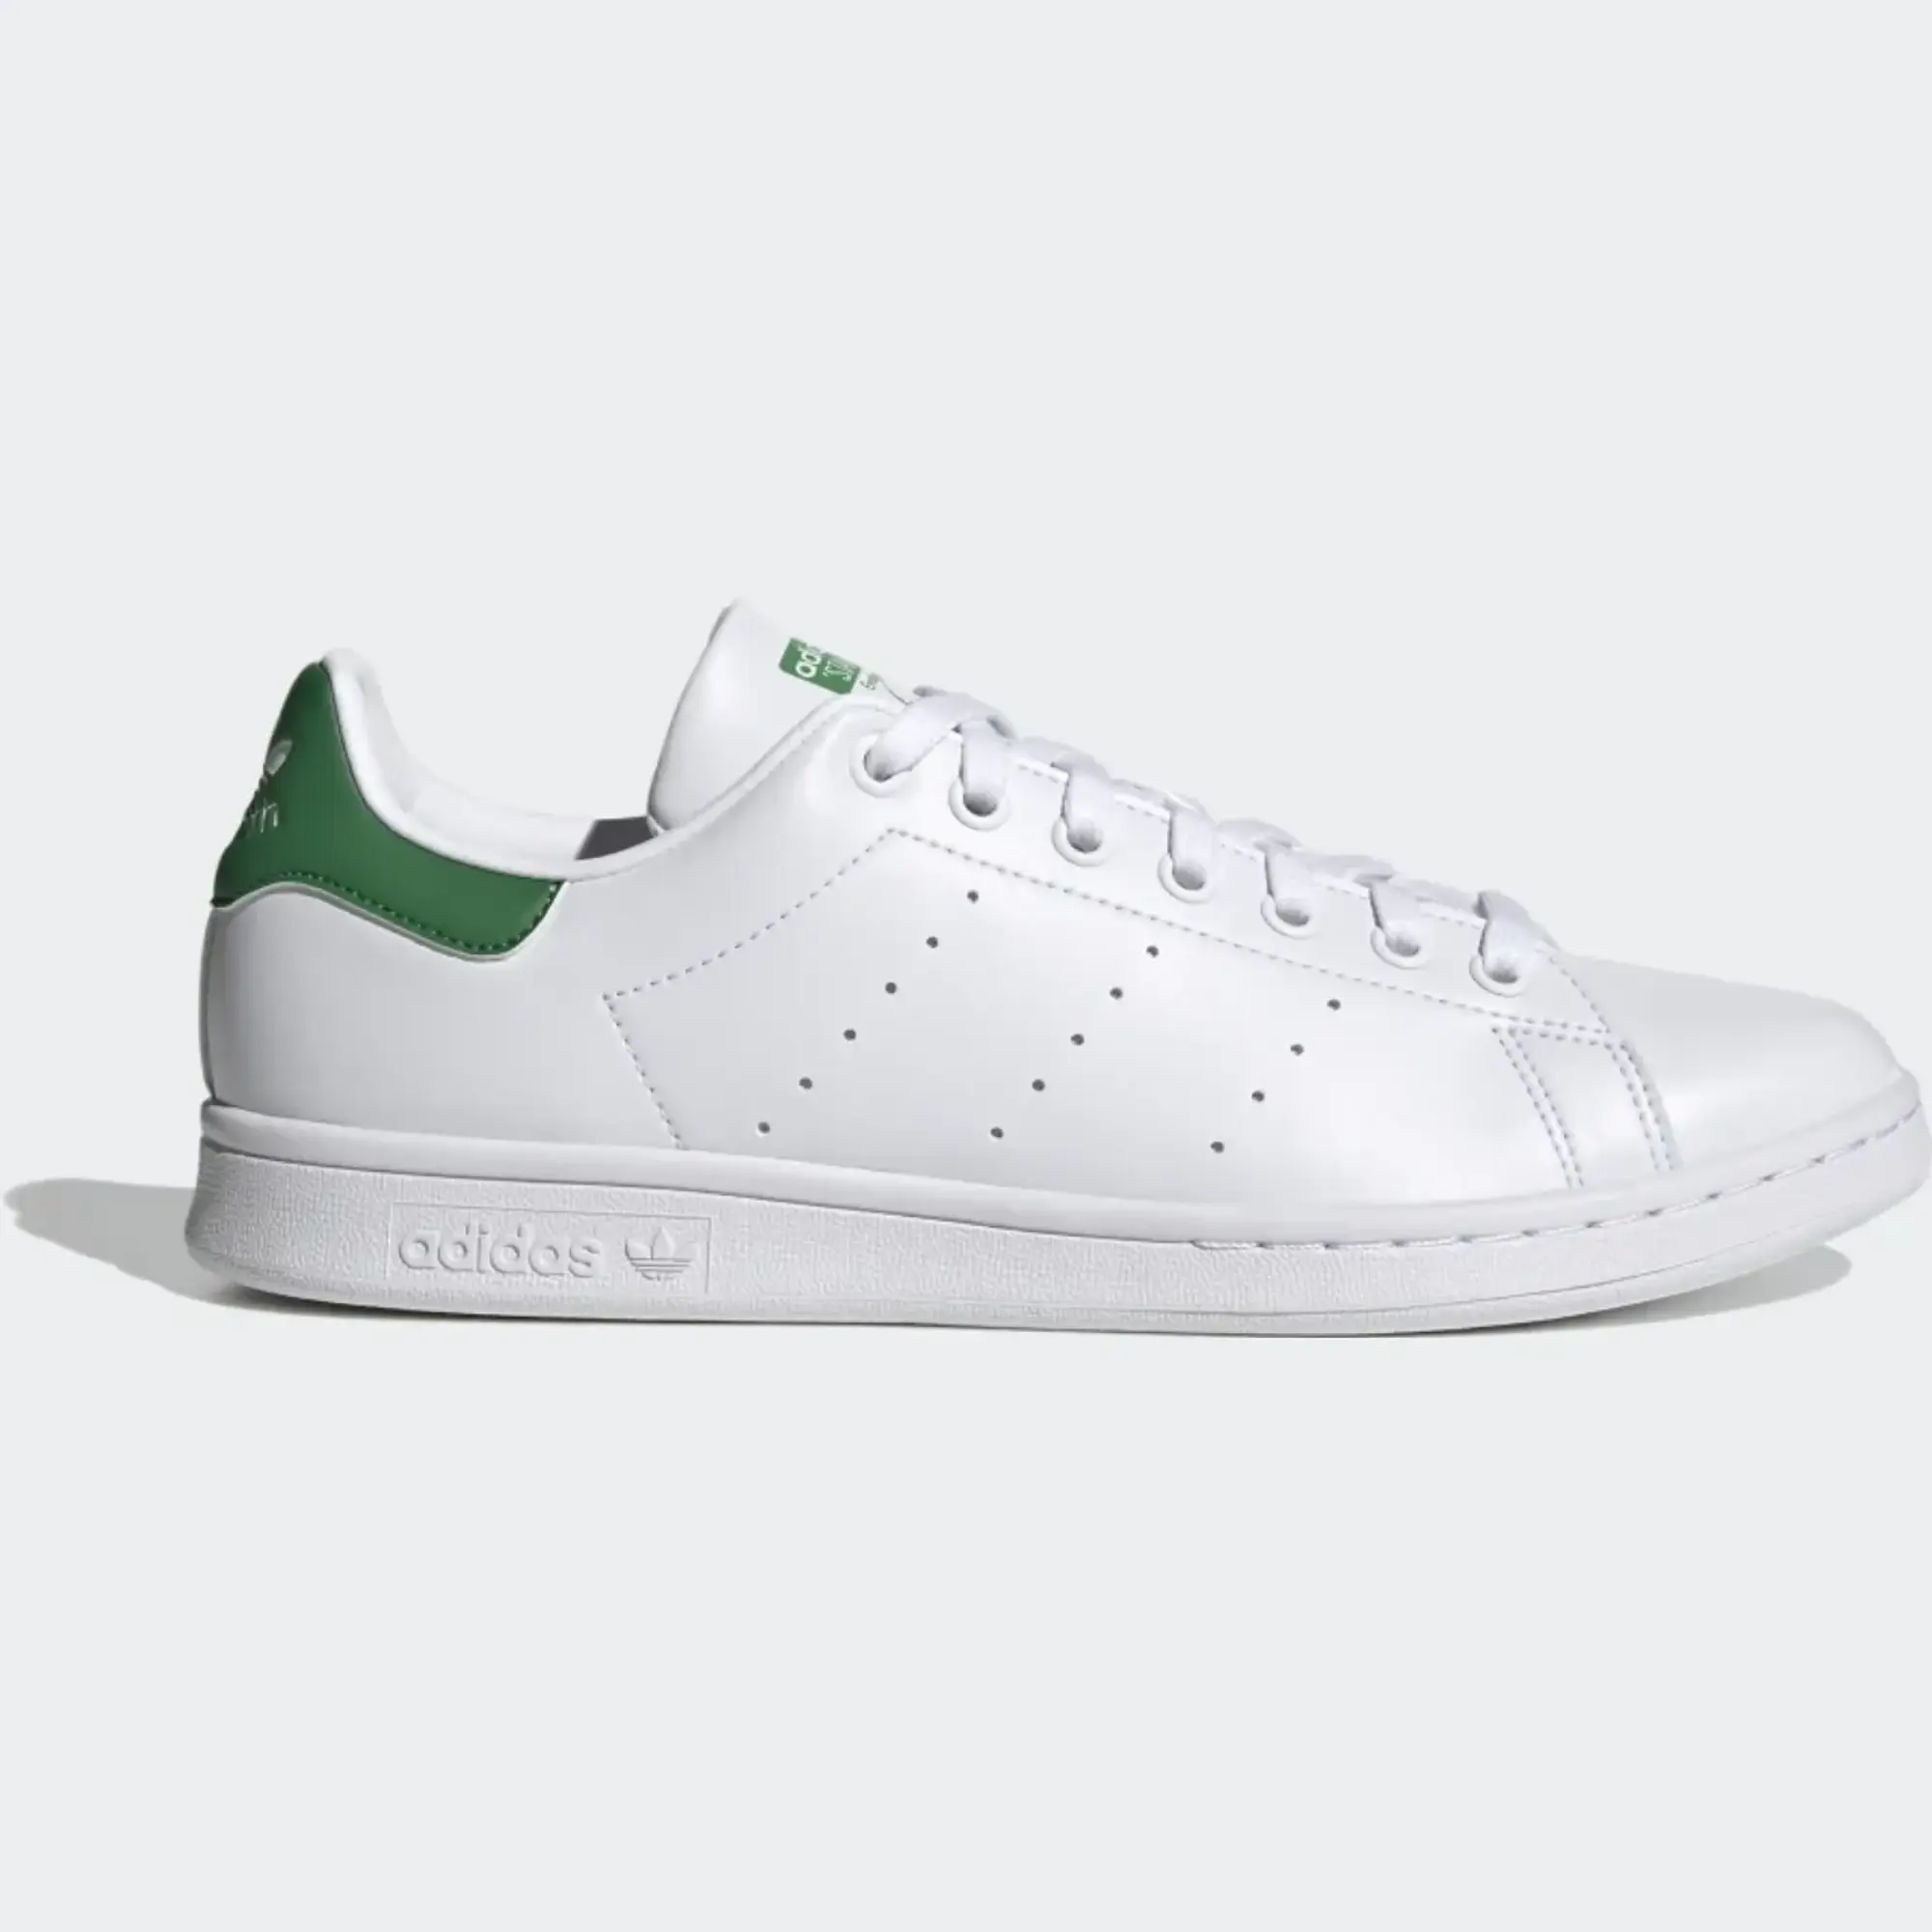 Adidas Originals Stan Smith Trainers In White With Green Tab - White